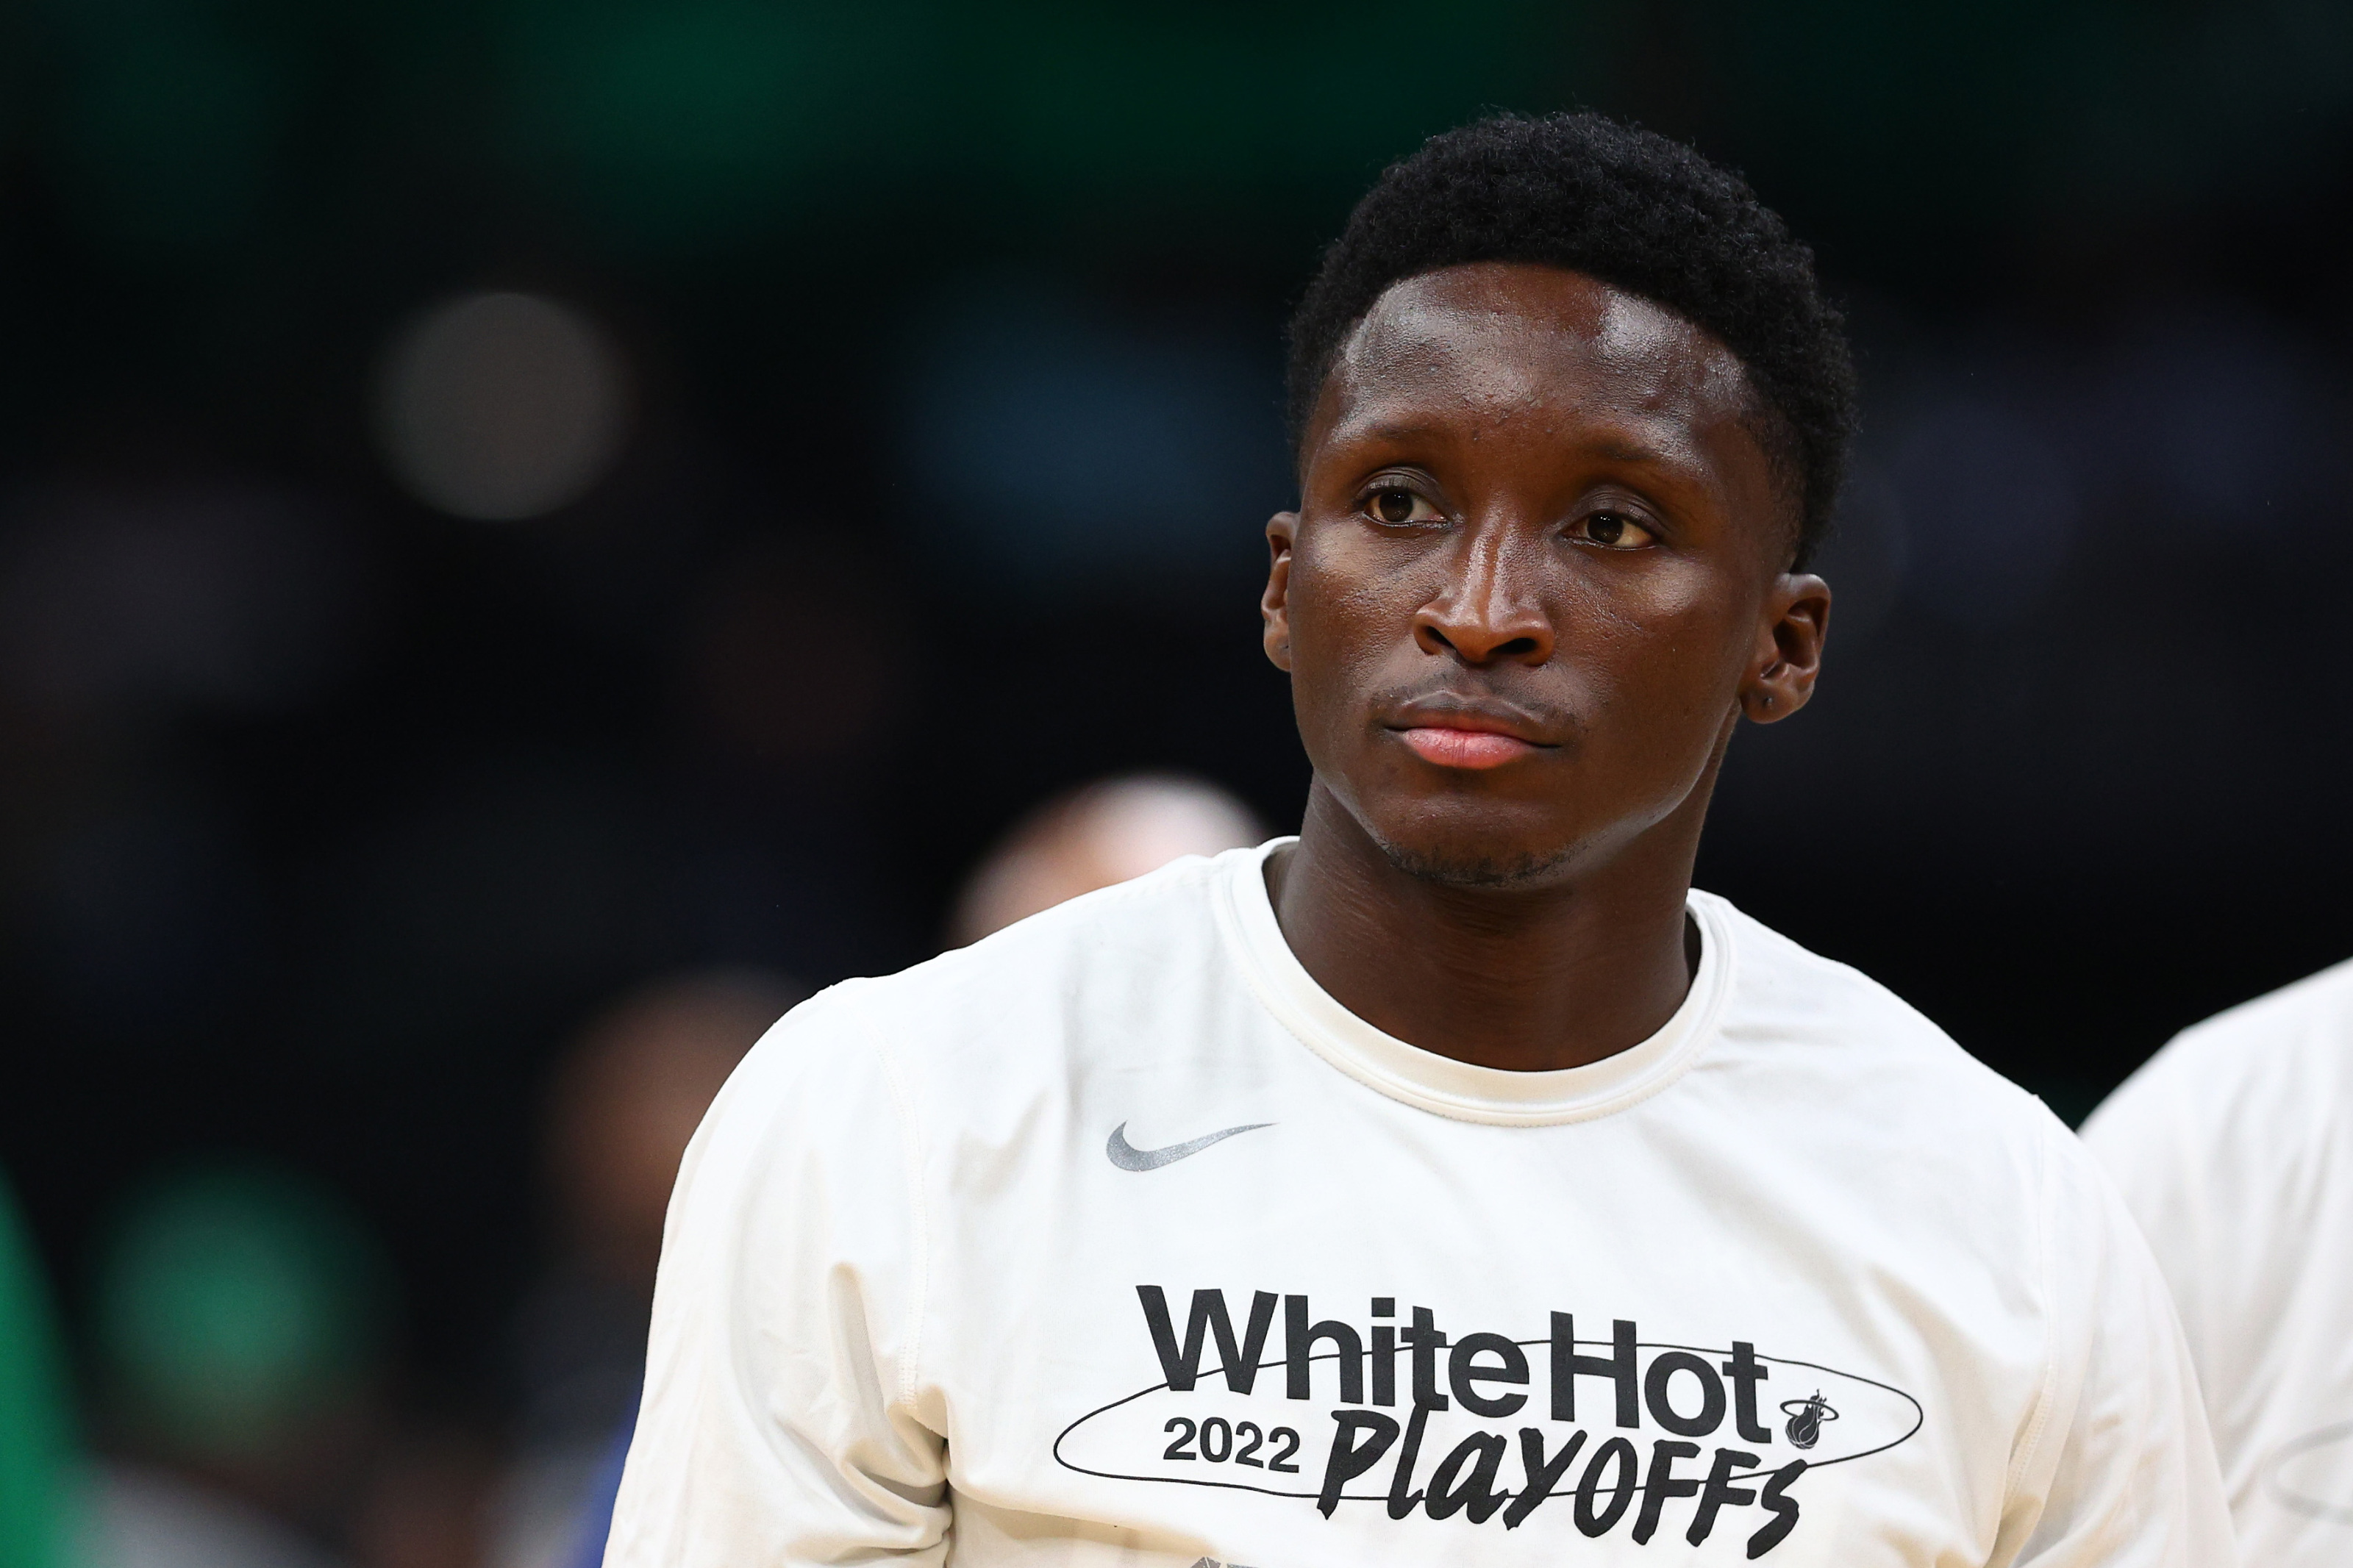 Miami Heat: Victor Oladipo's knee injury presents a glimpse of the risk